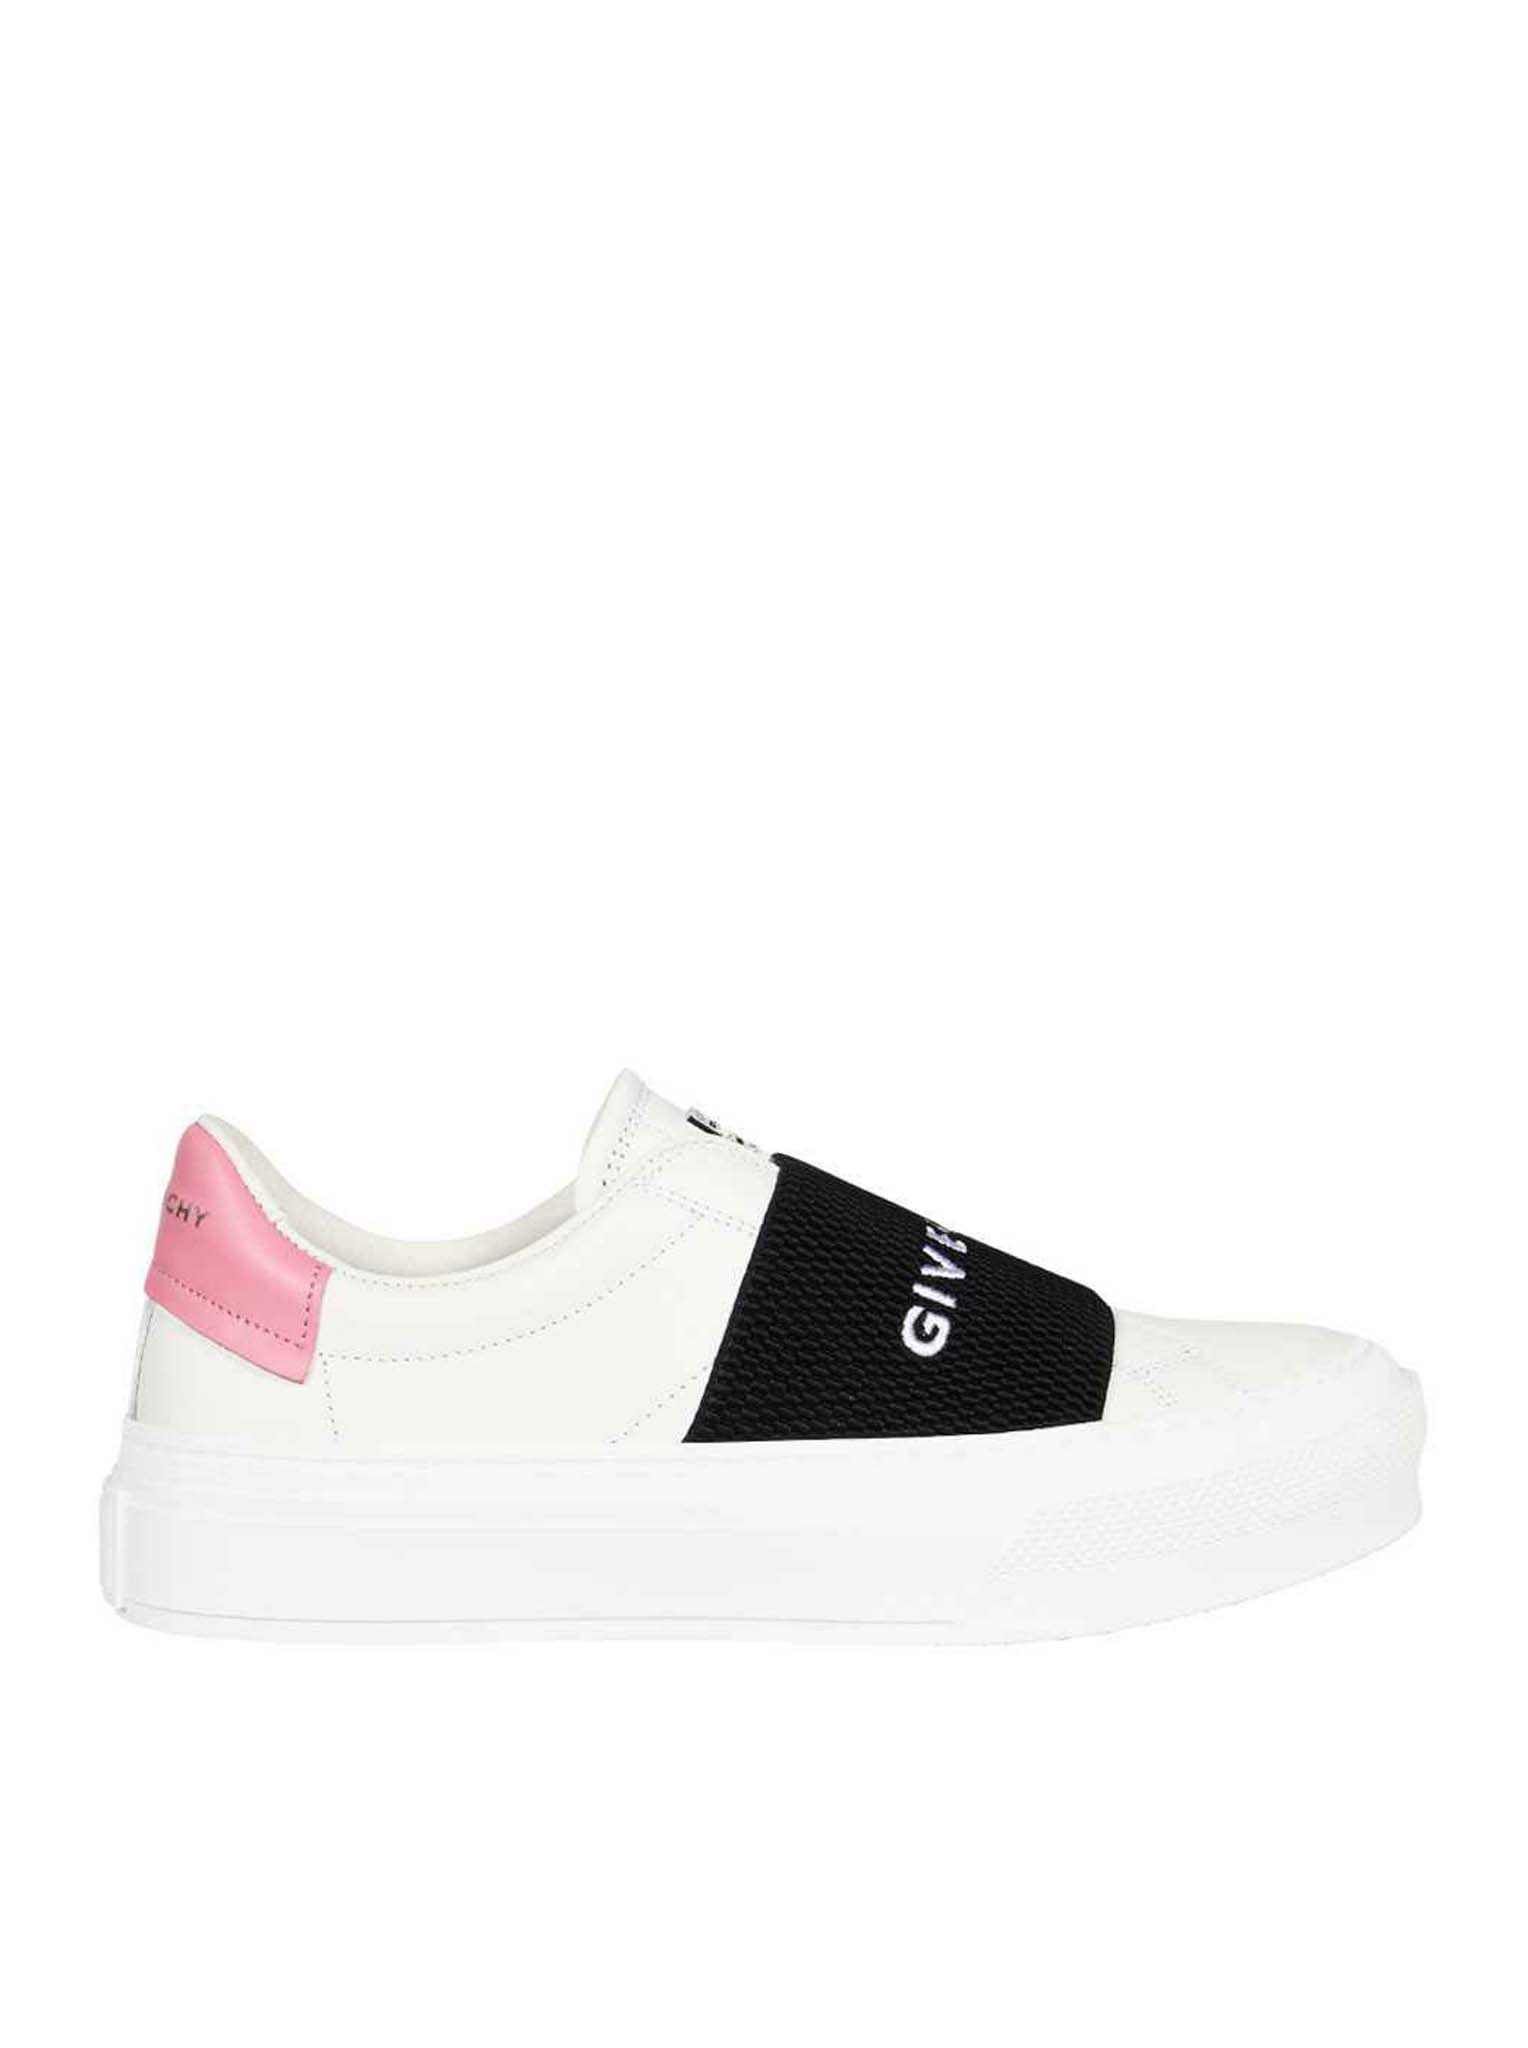 GIVENCHY CITY SPORT ELASTIC SNEAKER